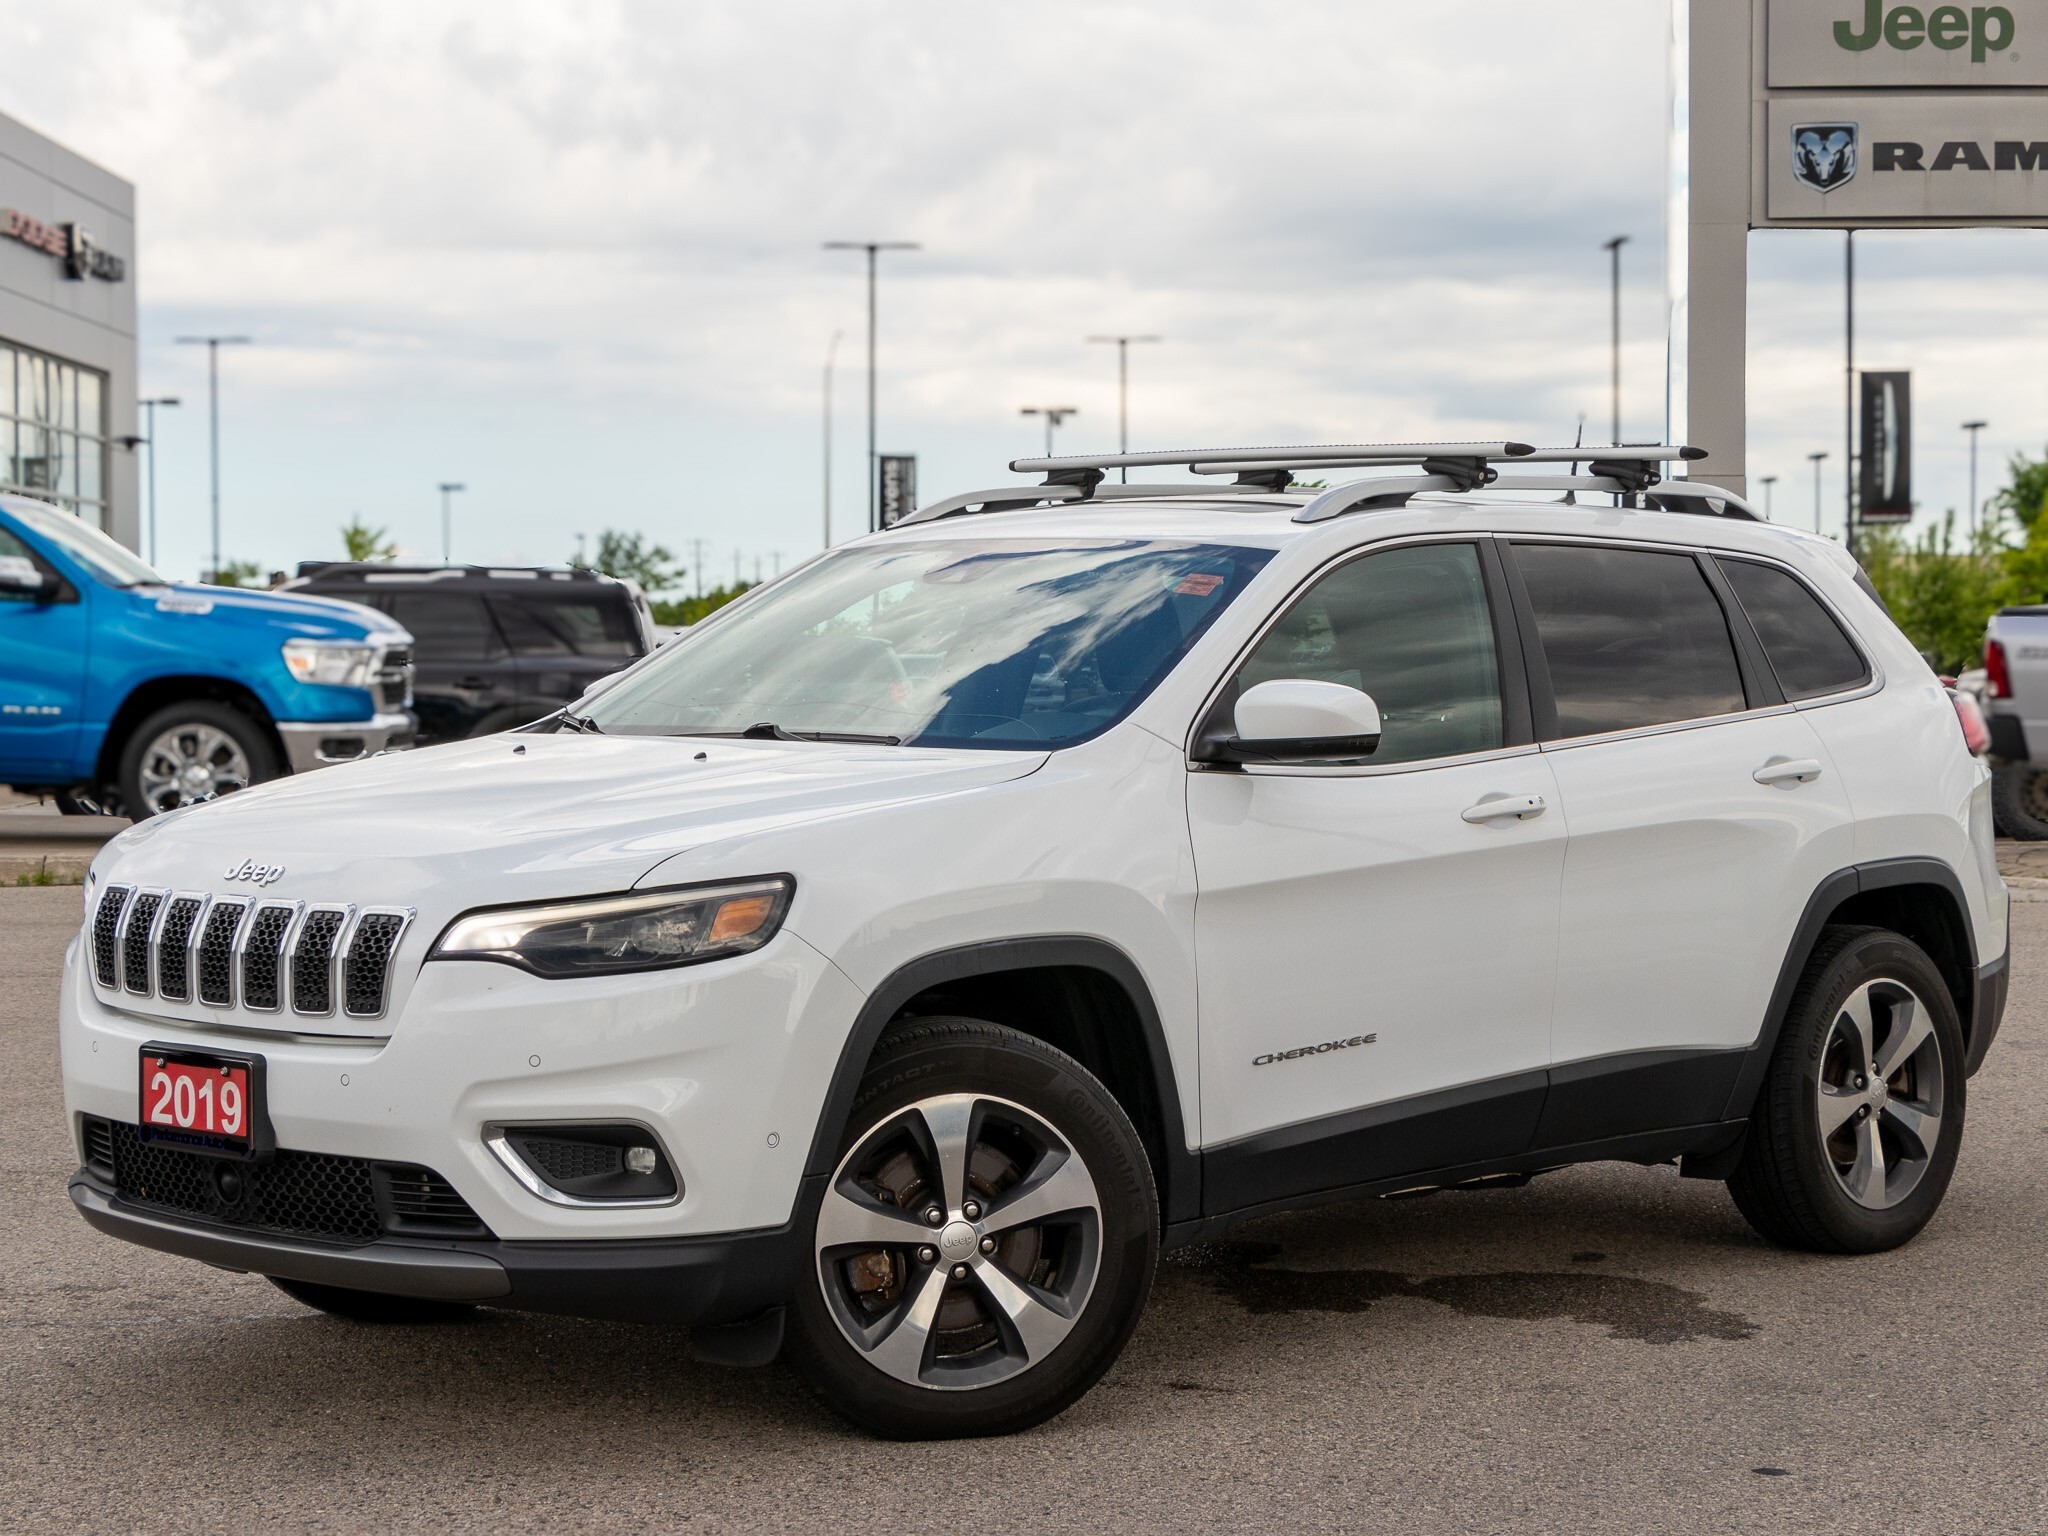 2019 Jeep Cherokee Limited Push–button Start | Back-up Cam | Adaptive